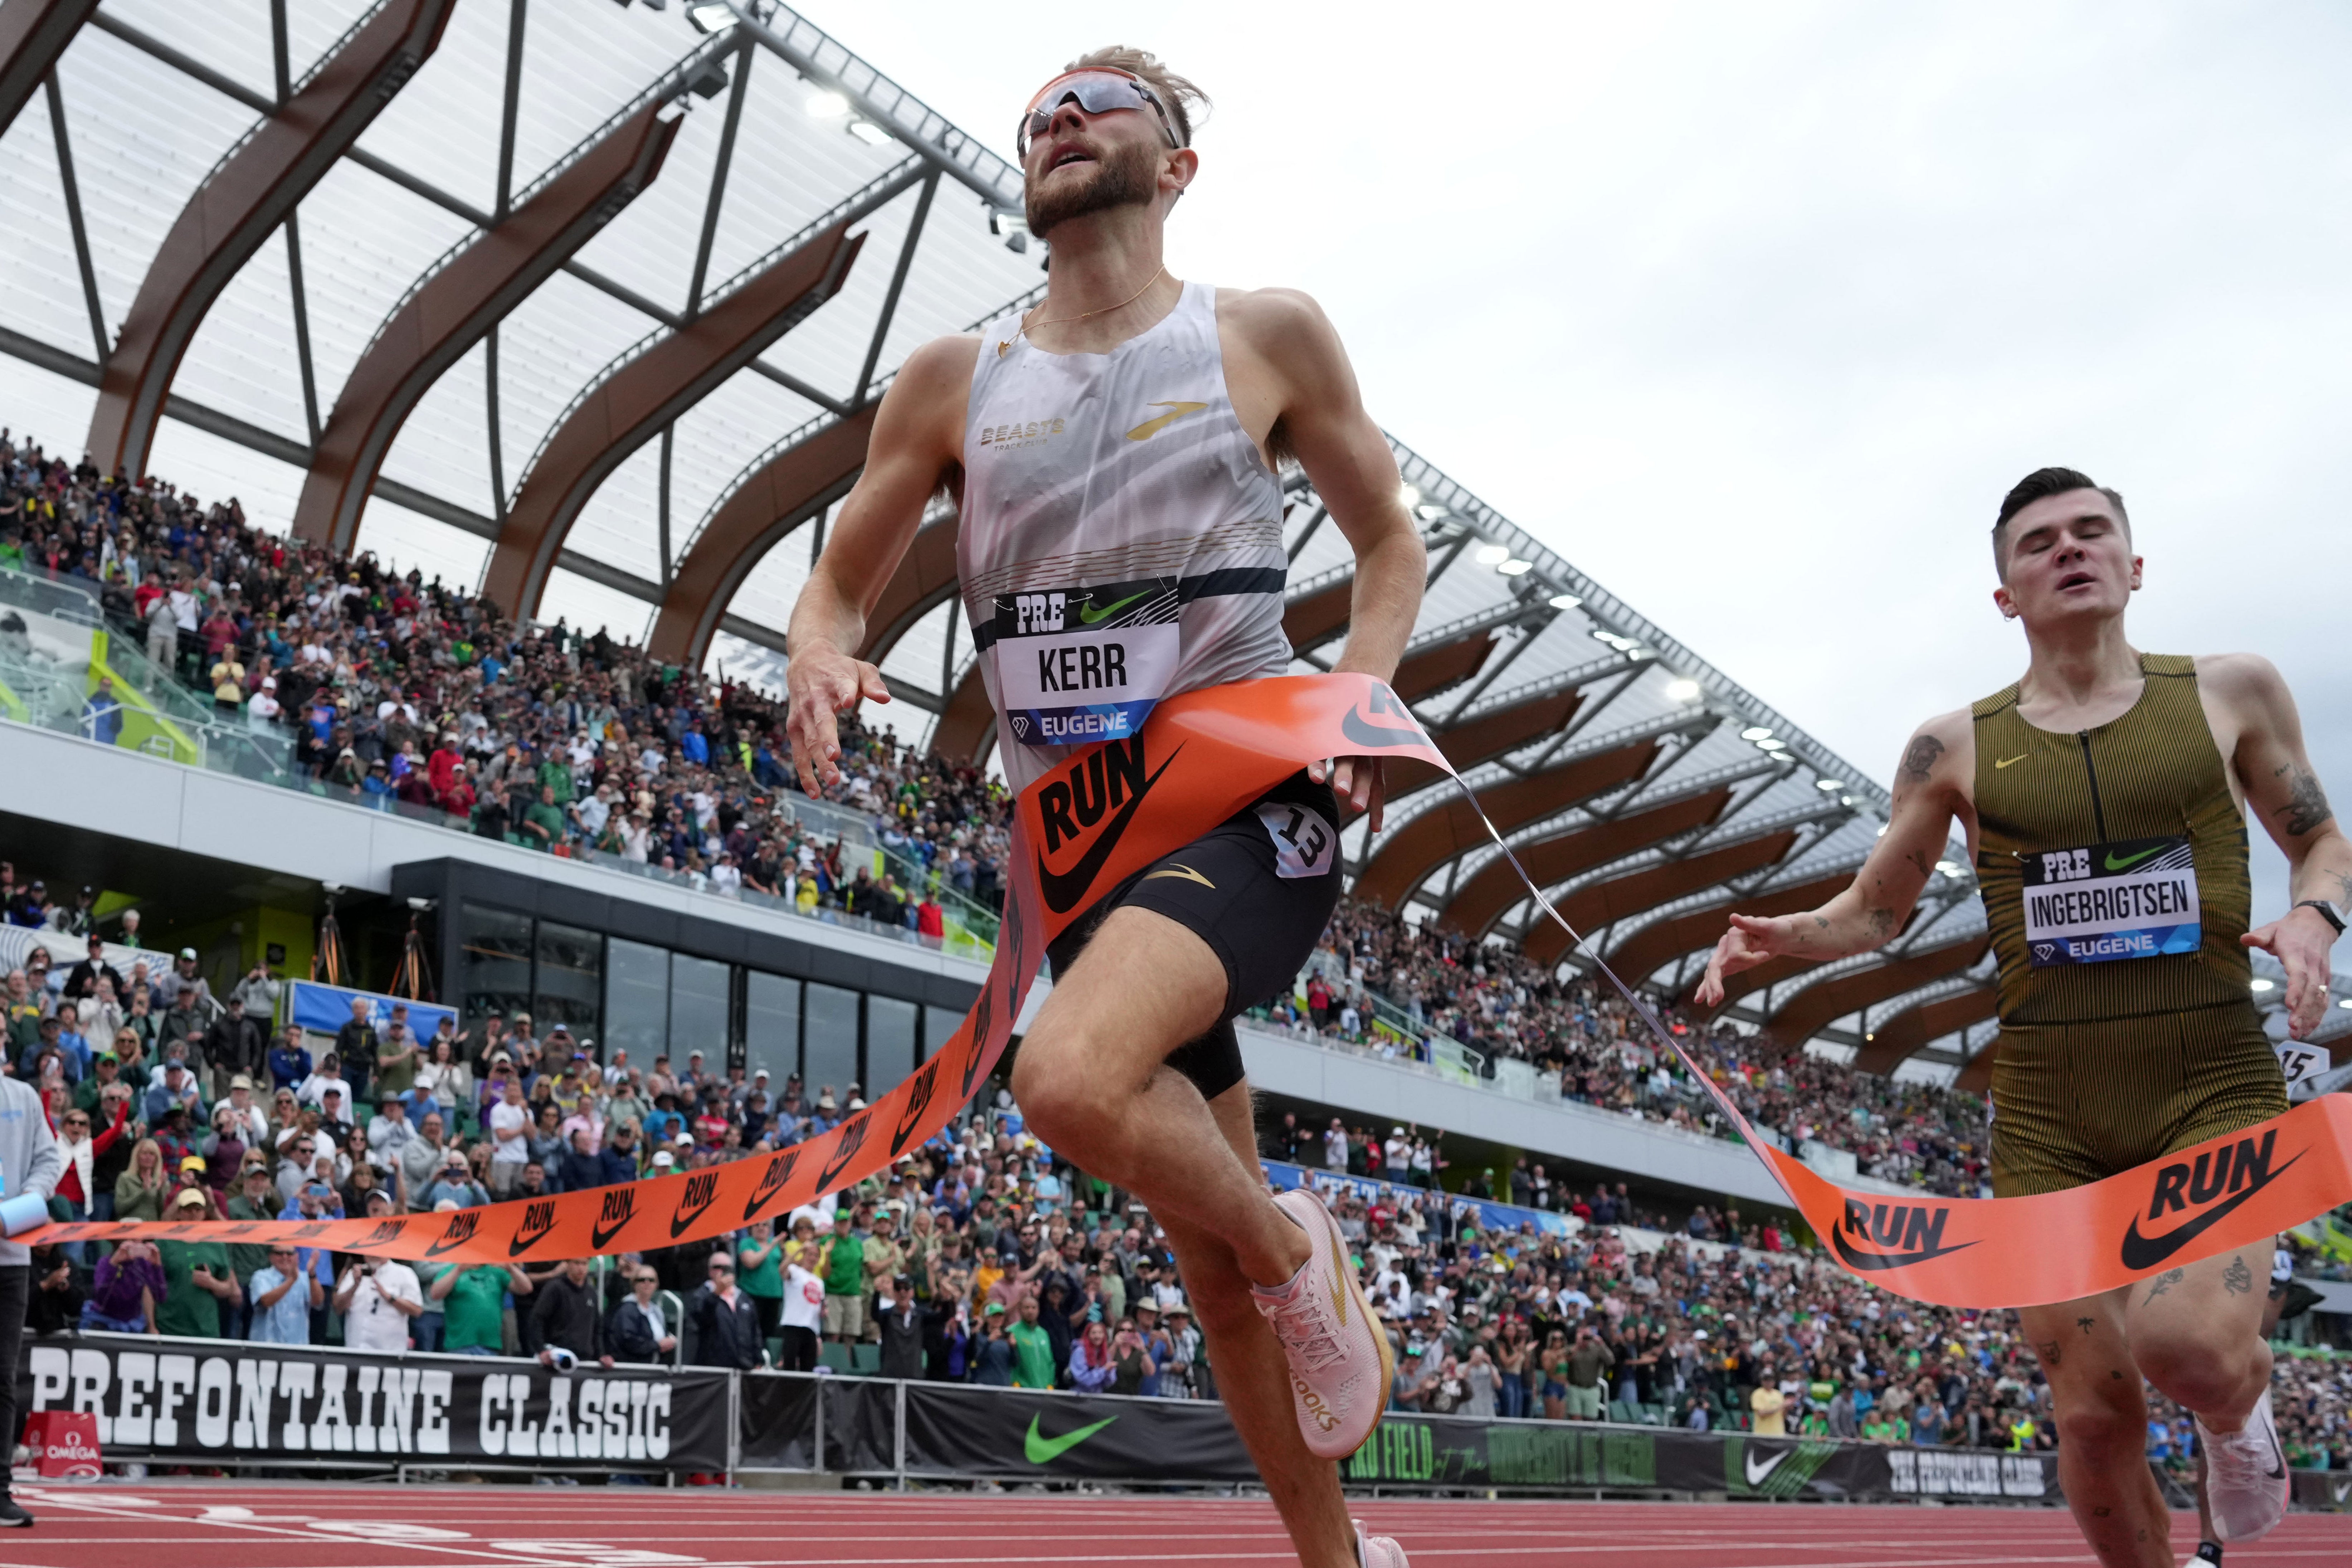 Josh Kerr outclassed the field to win the mile race, in a British record time, at the Diamond League event in Eugene